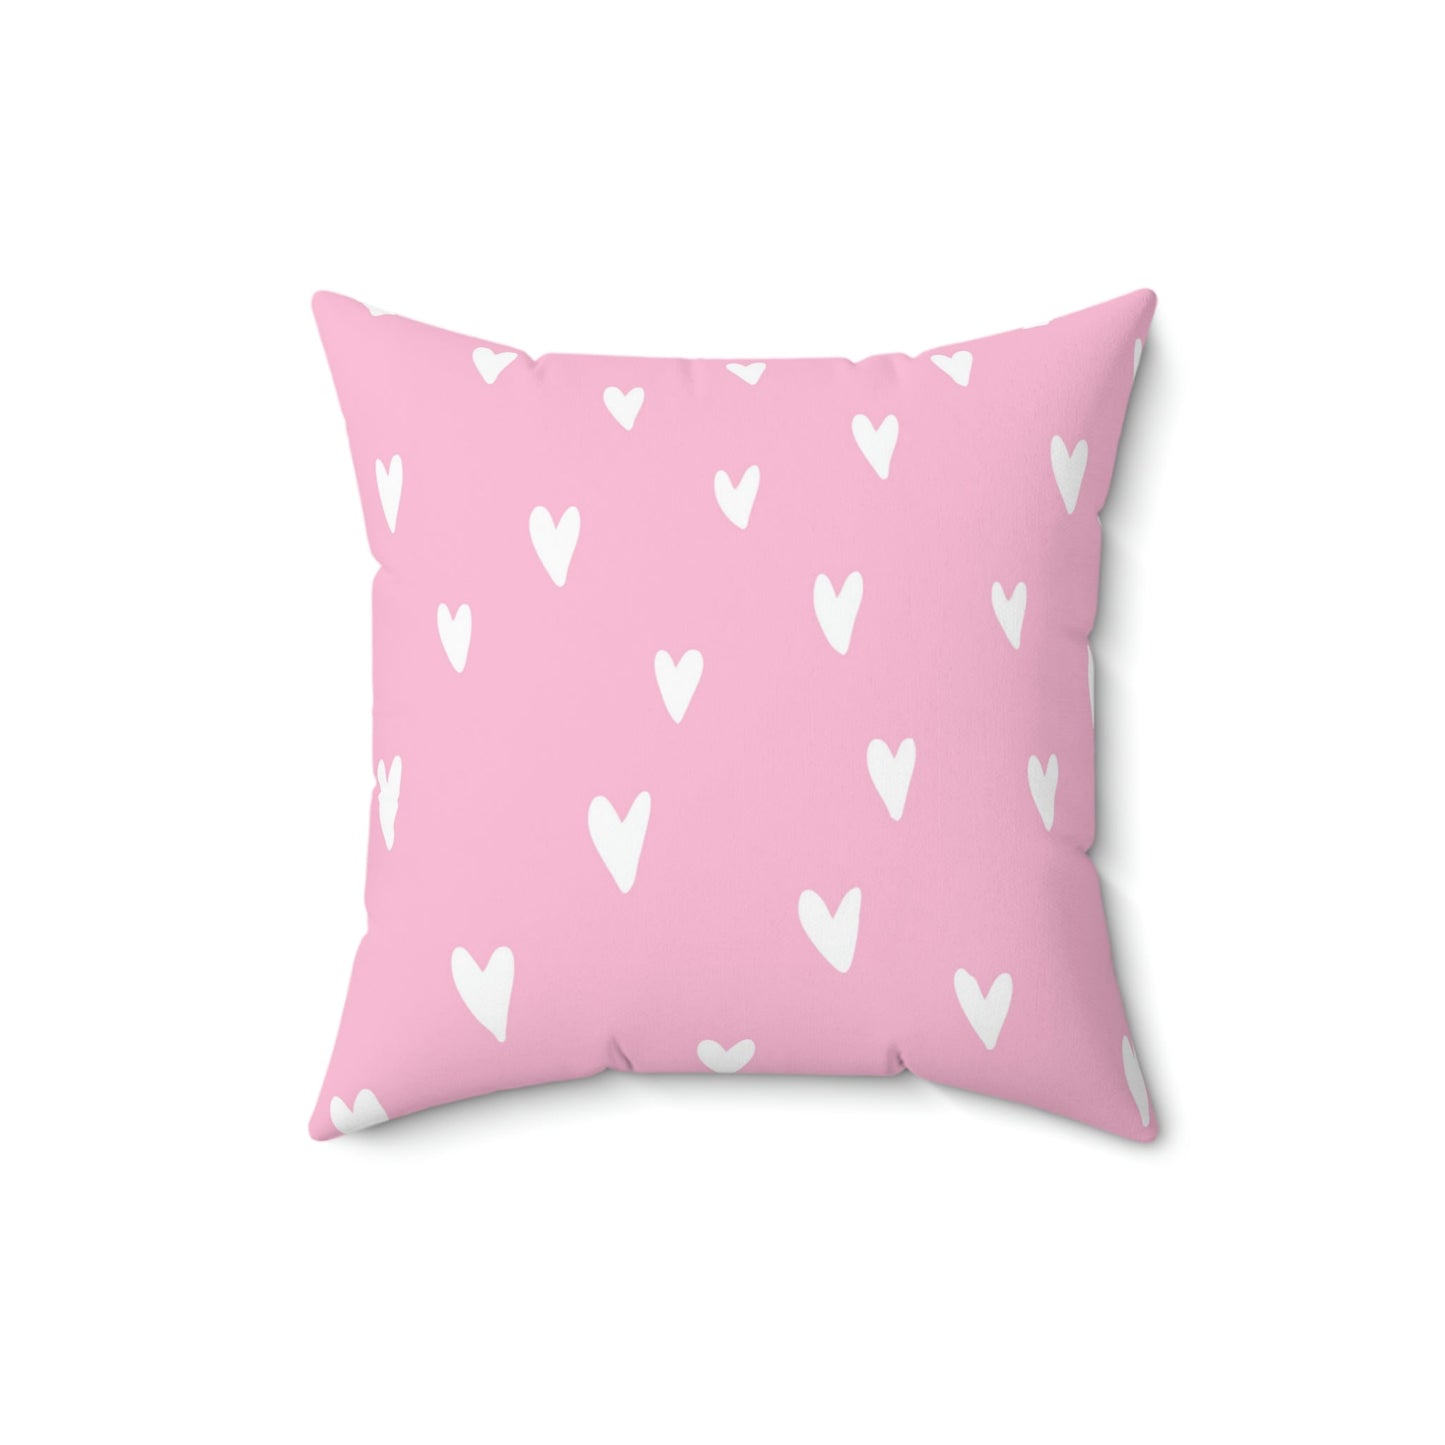 Sending a Thousand Hearts Square Pillow Home Decor Pink Sweetheart